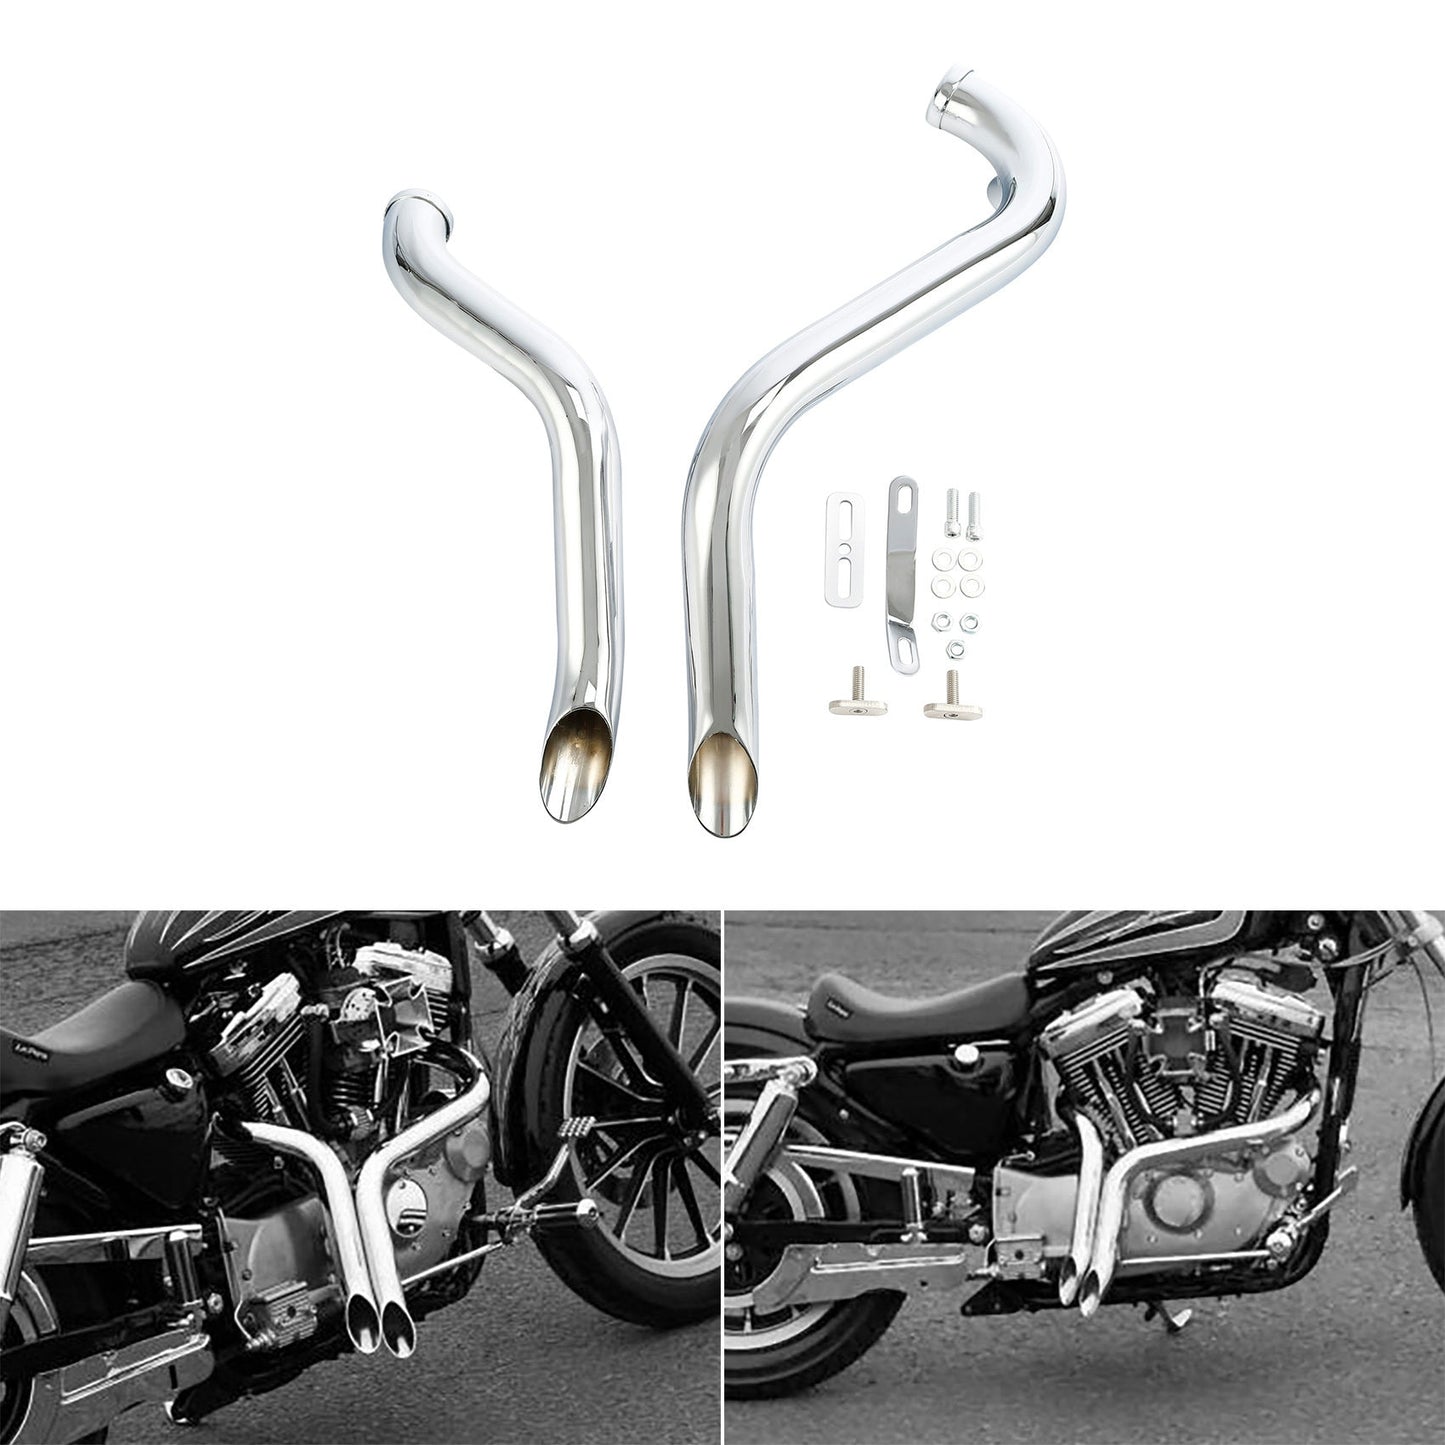 Voodoo Cycle House Custom Motorcycle 1.75" Chrome / Black Exhaust Drag Pipes For Harley-Davidson Sportster XL 883 1200 Softail Dyna Touring 1984-UP & Custom Applications